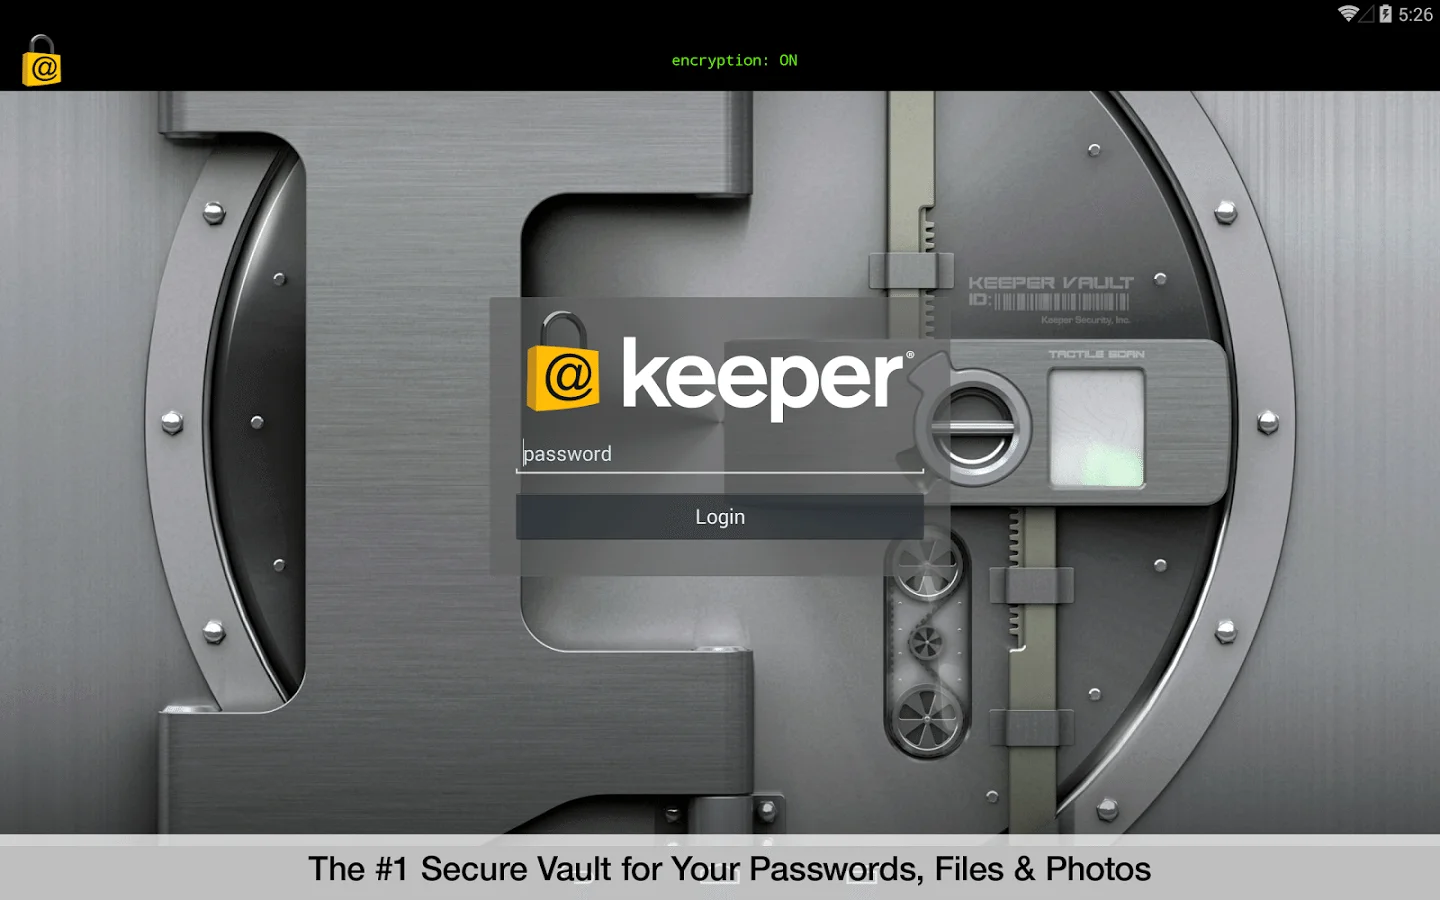 8 of the Best Password Management Tools for Mac